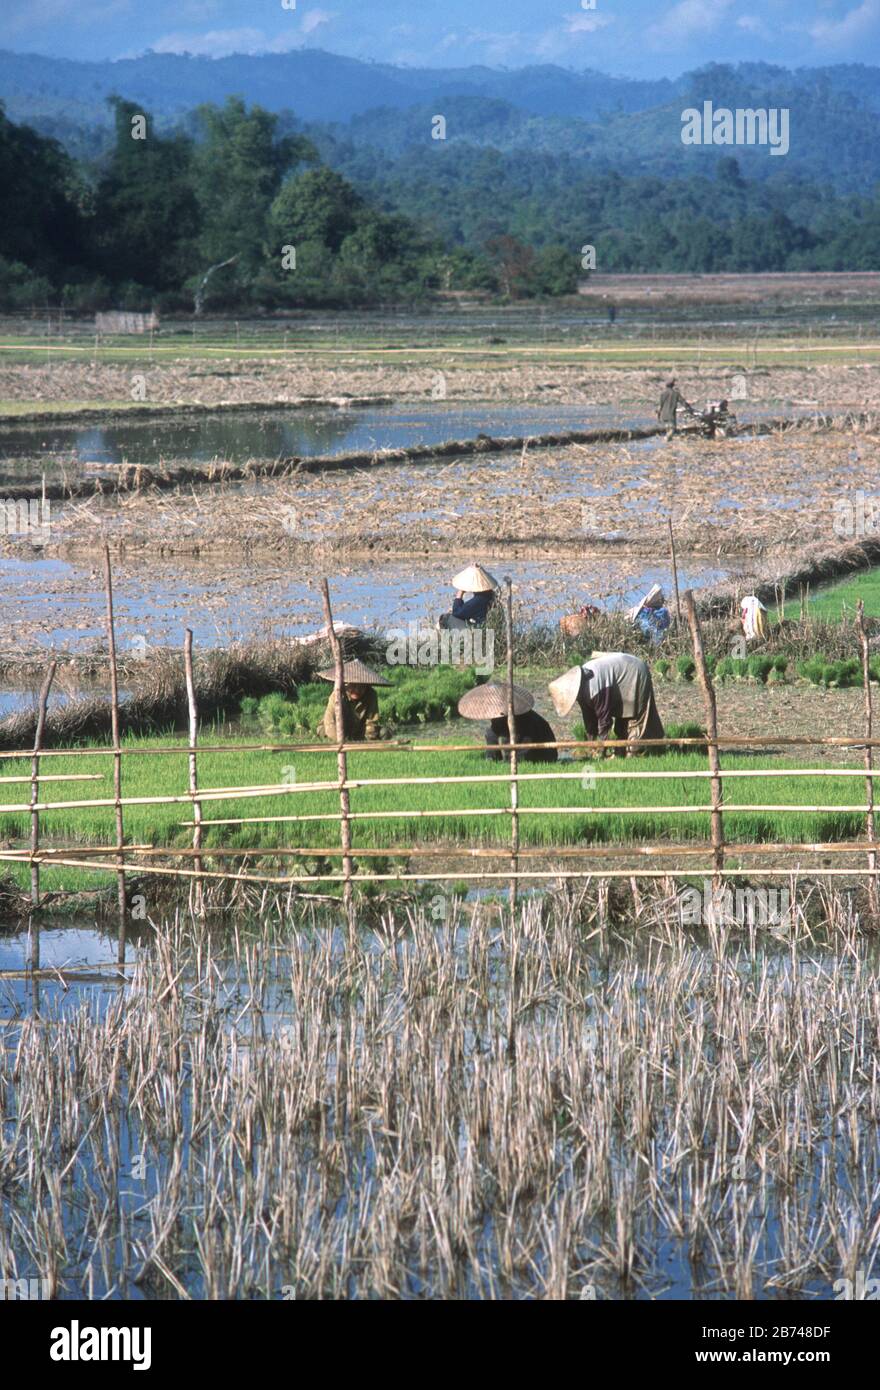 Lao farmers, wearing traditional, conical, straw hats, working in flooded rice paddies / fields near Vang Vien (Vang Vieng), Vientiane Province, Laos. Stock Photo